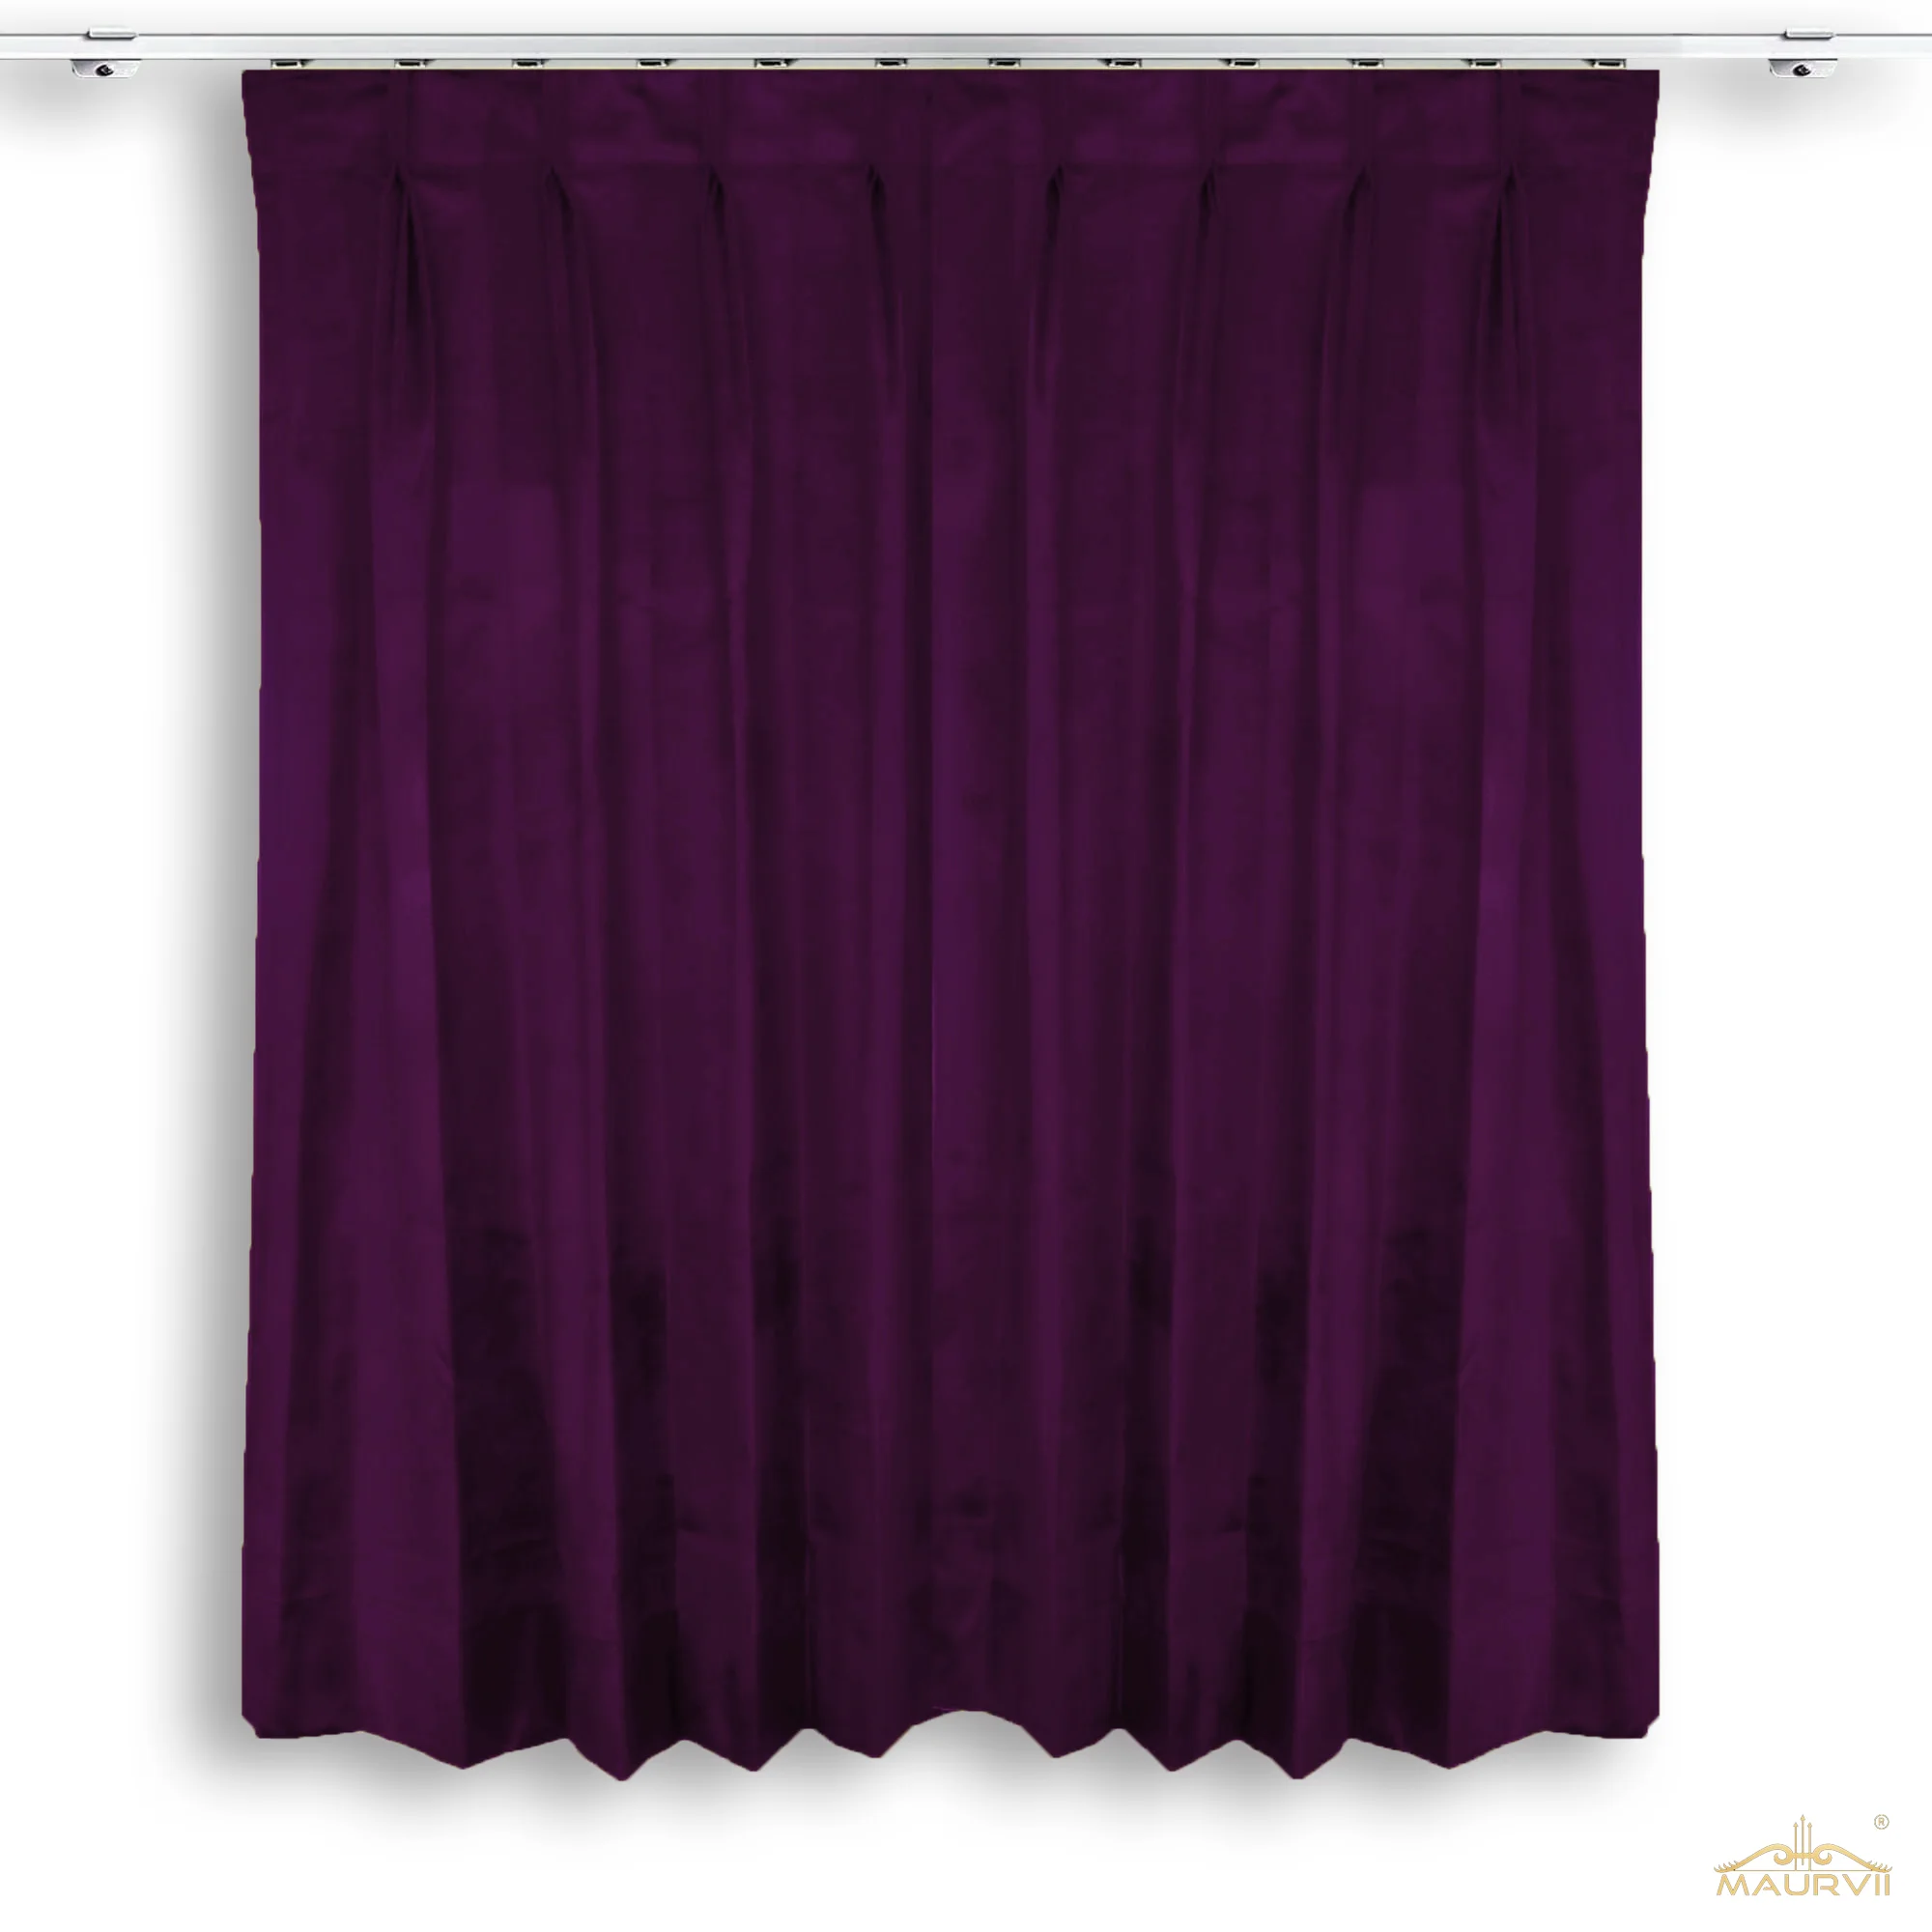 Double pleated velvet stage curtains in plum color